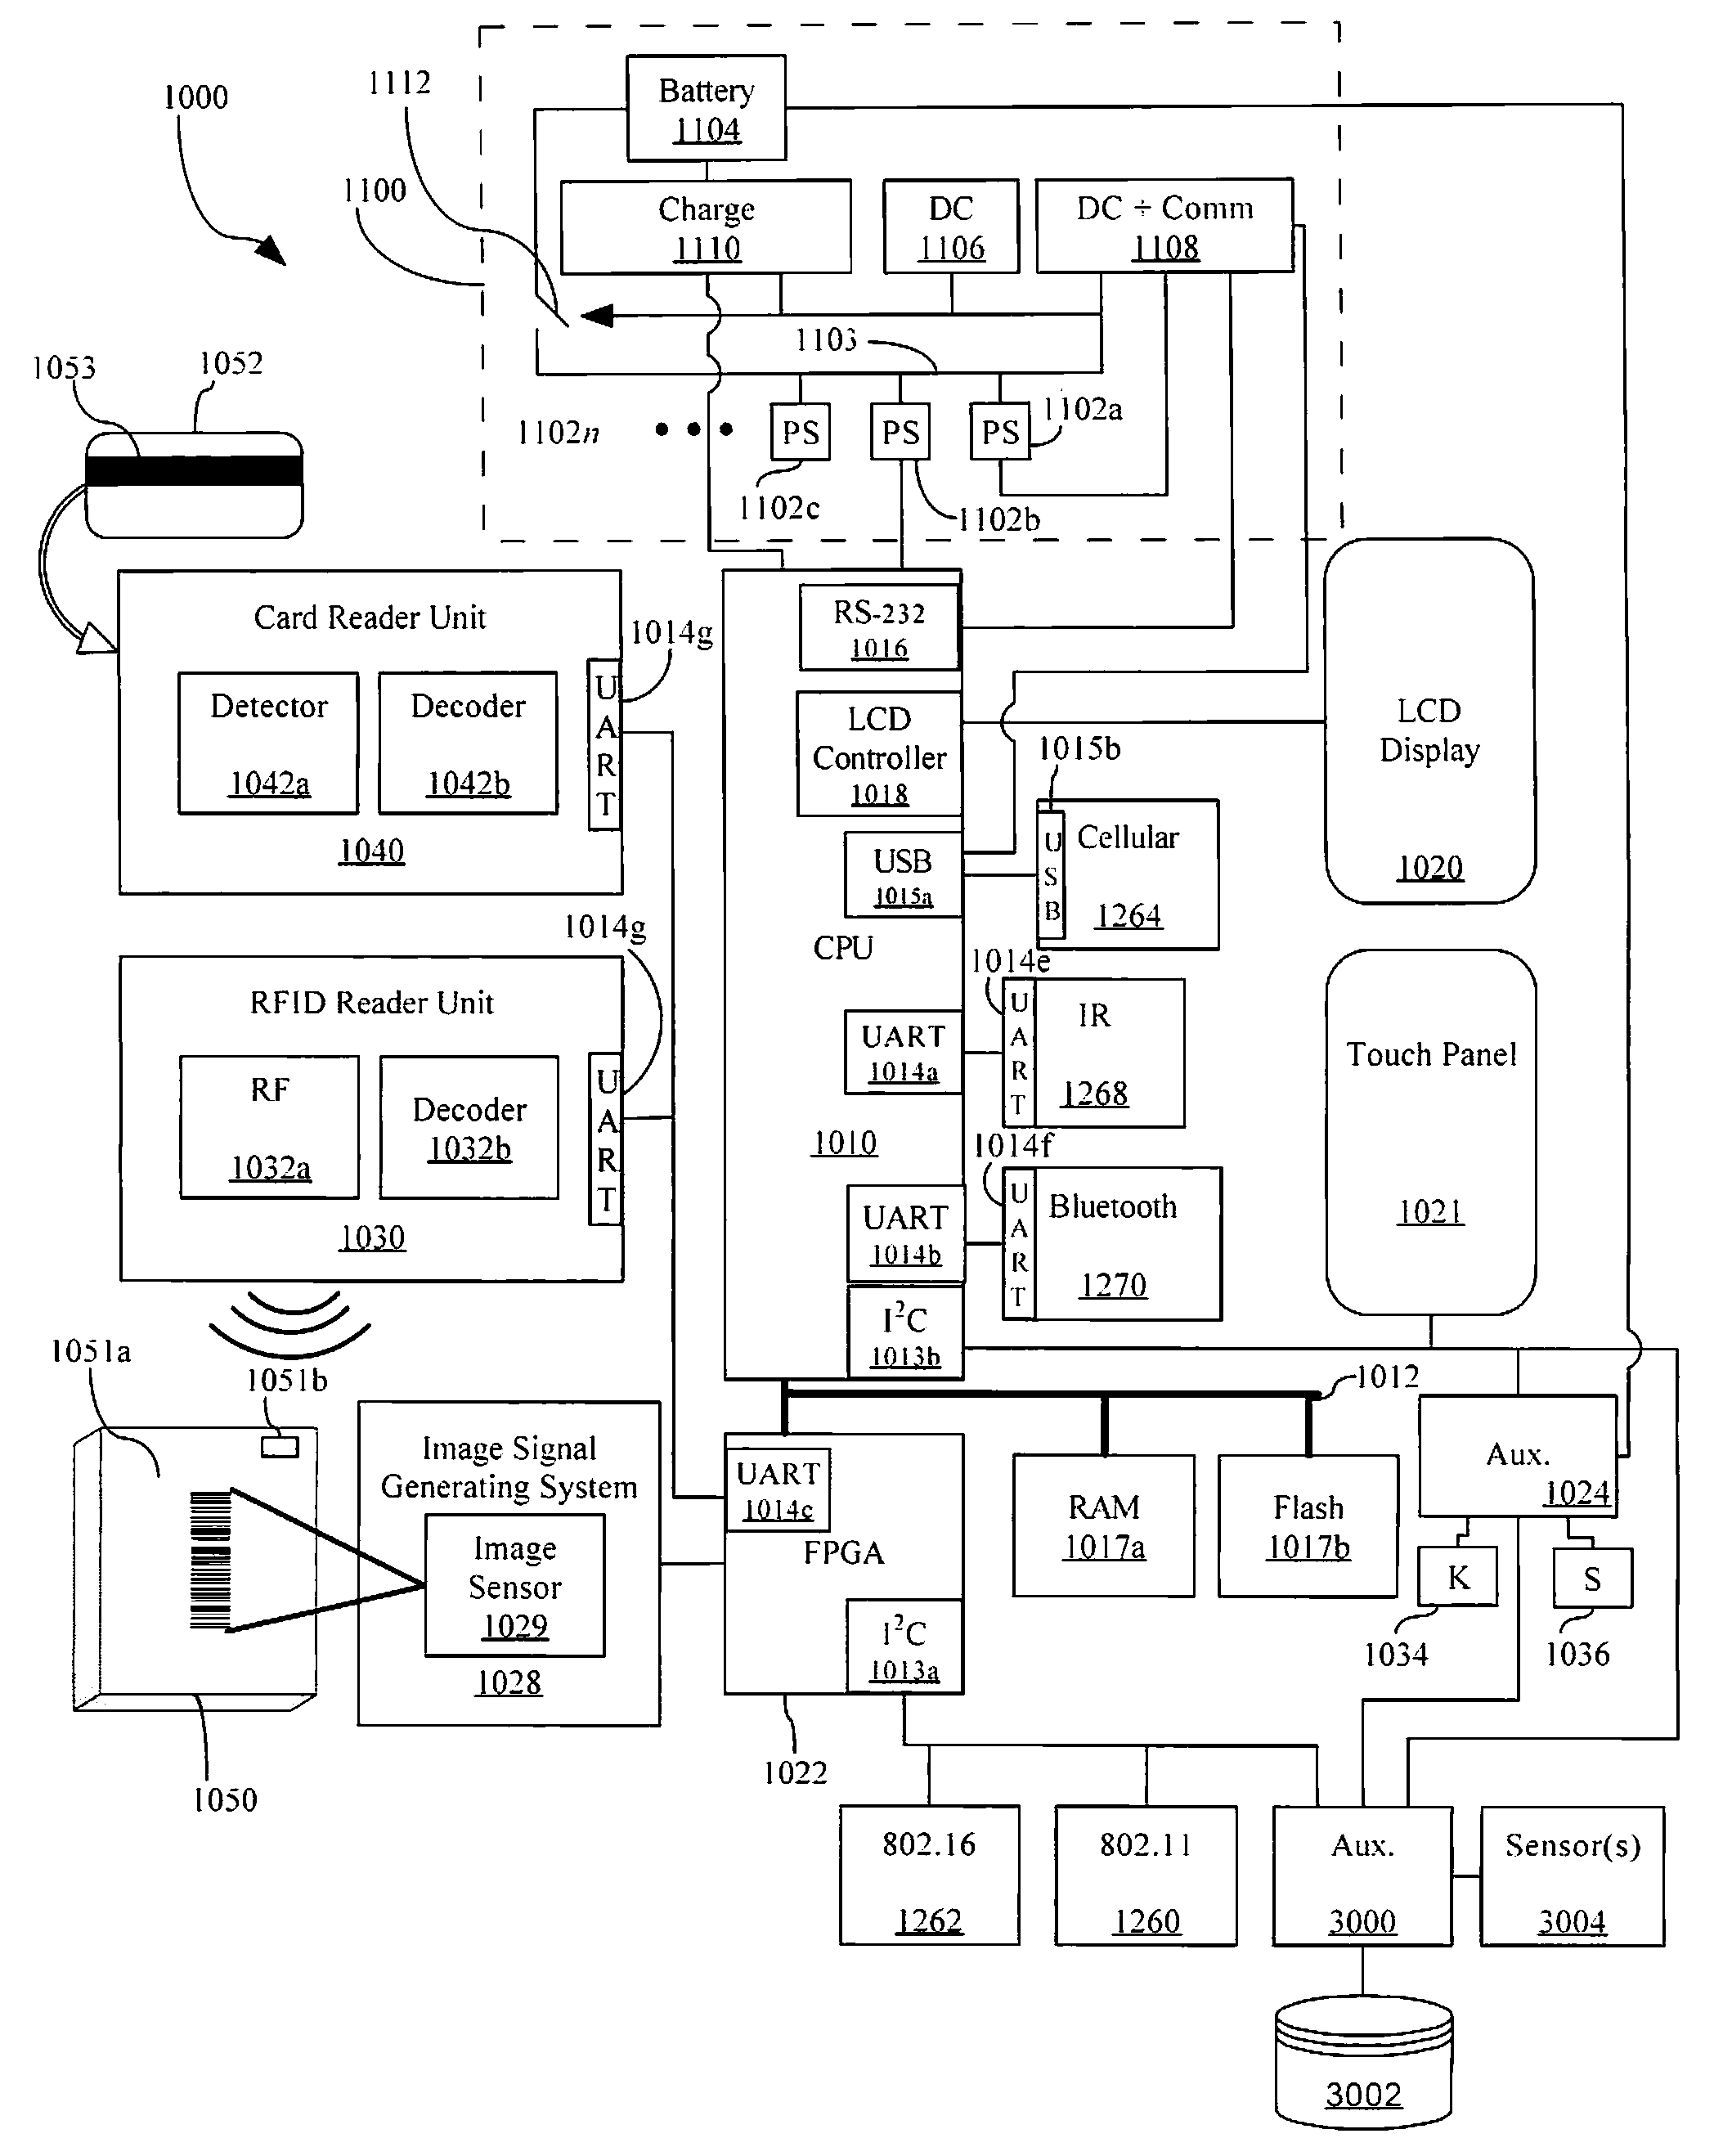 Apparatus and methods for monitoring one or more portable data terminals